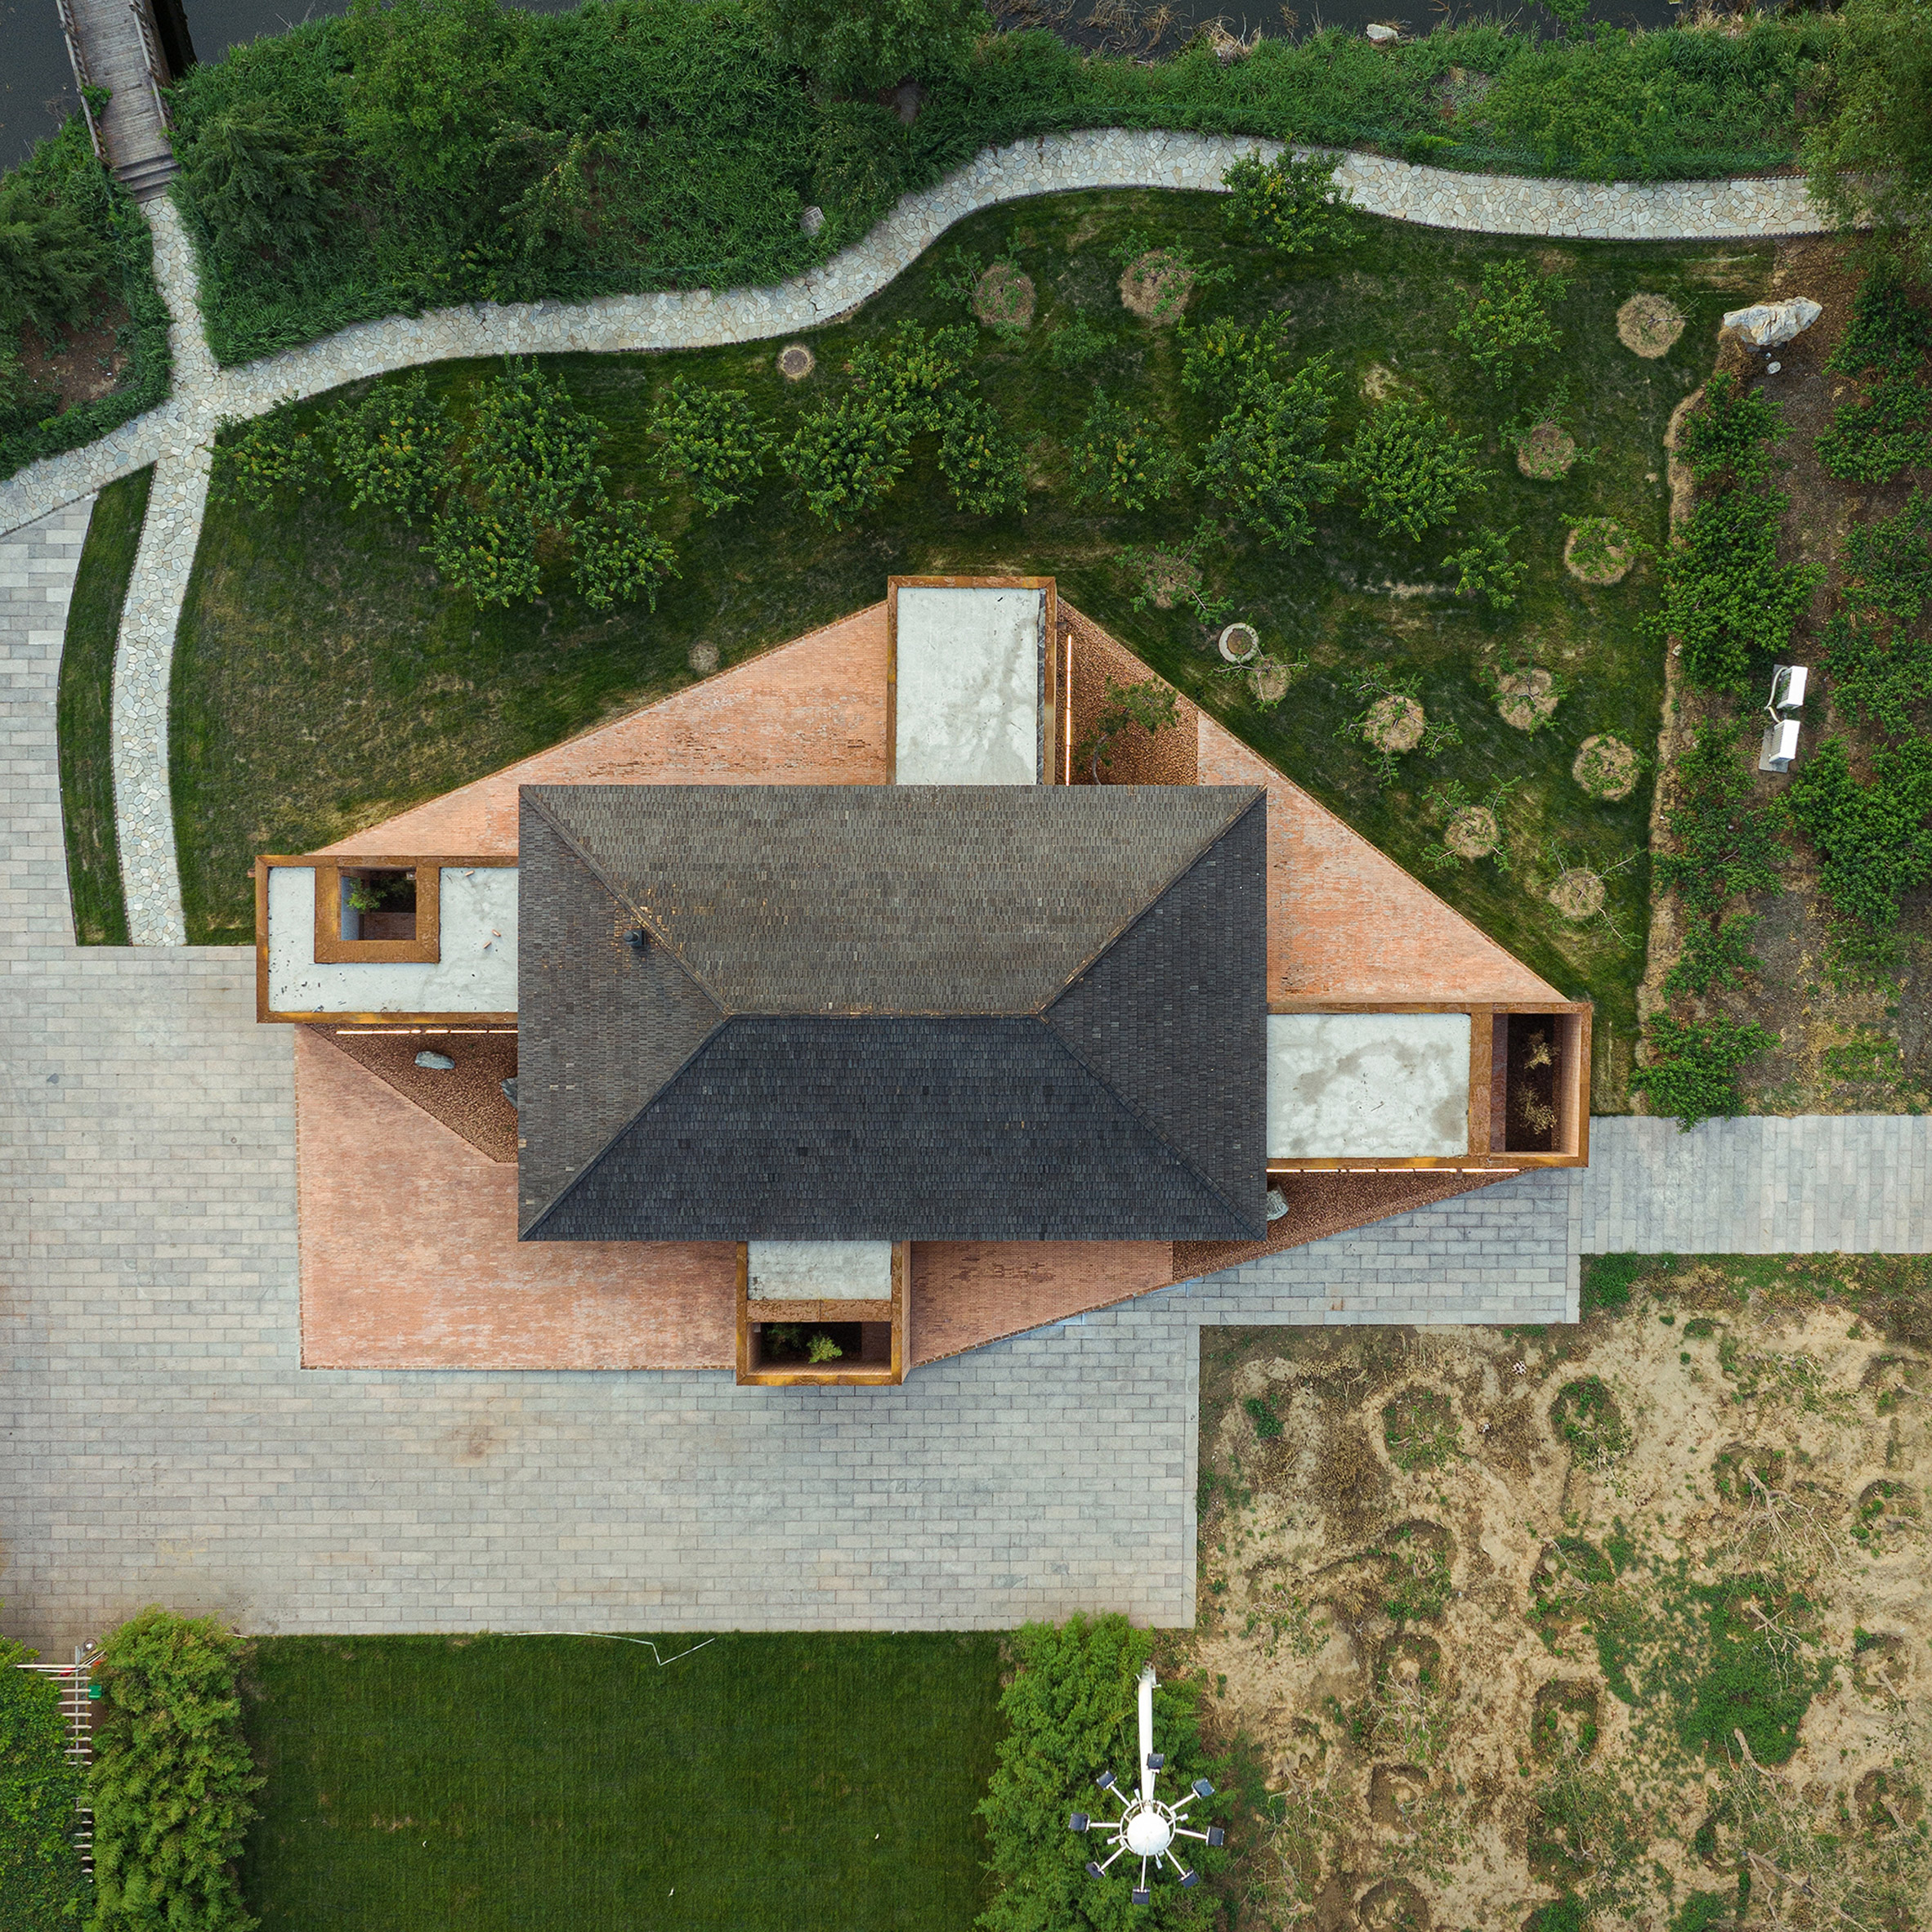 Dezeen's top 10 Chinese architecture projects of 2020: Courtyard Villa, Hebei, by Arch Studio